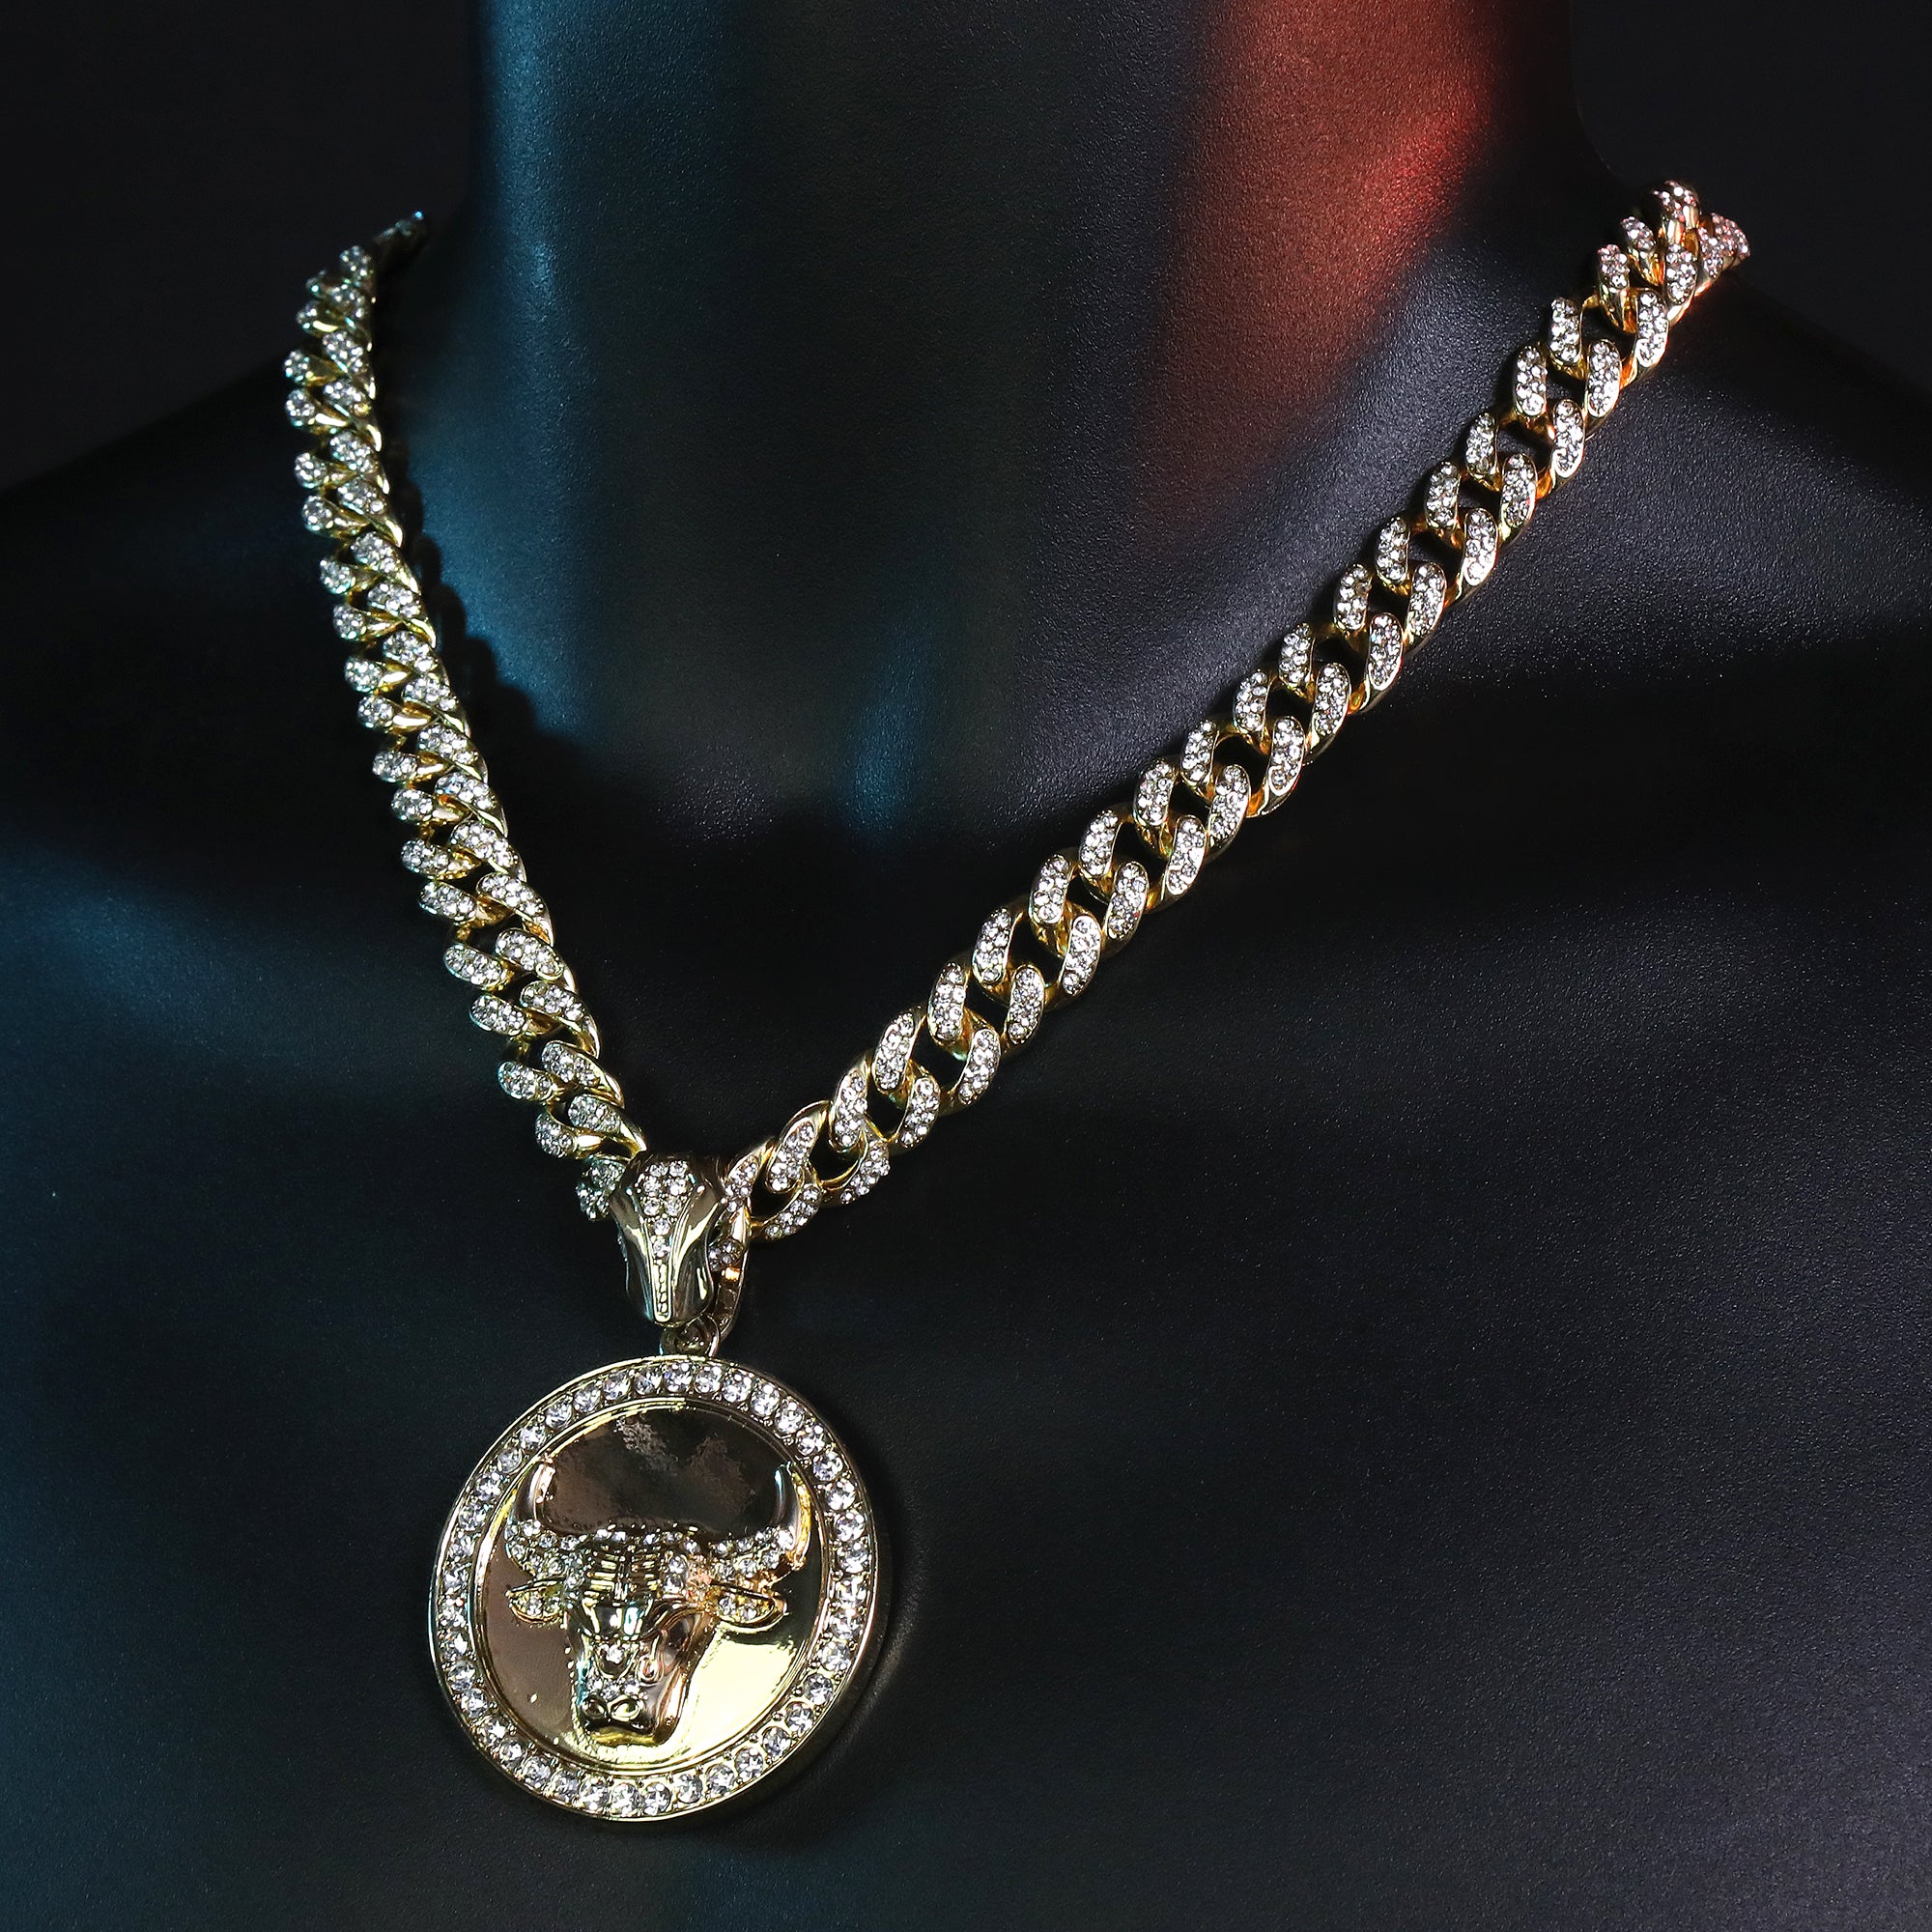 Large Round Clear Bull Pendant Iced Cuban Cz Chain Mens Hip Hop Jewelry 18-24"